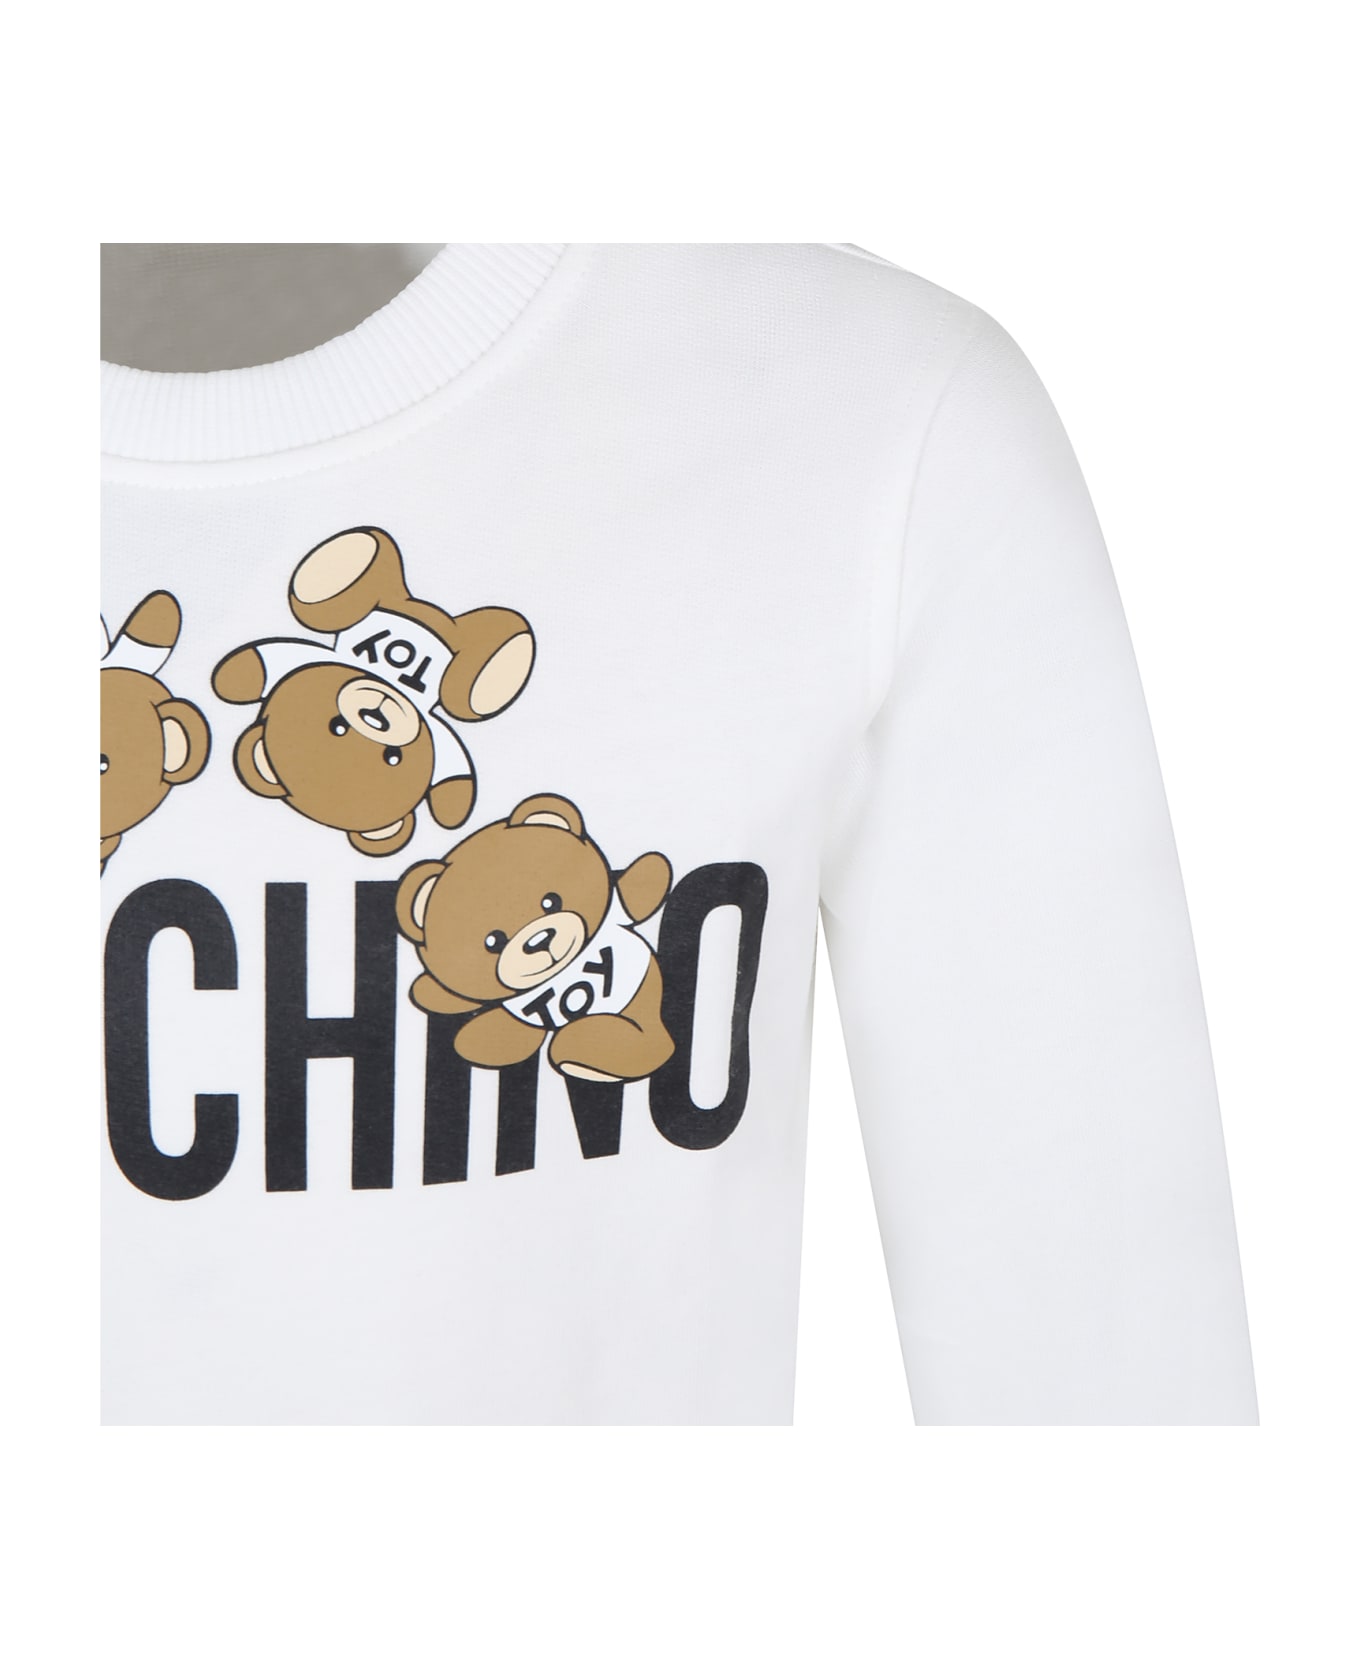 Moschino White Sweatshirt For Kids With Teddy Bear And Logo - White